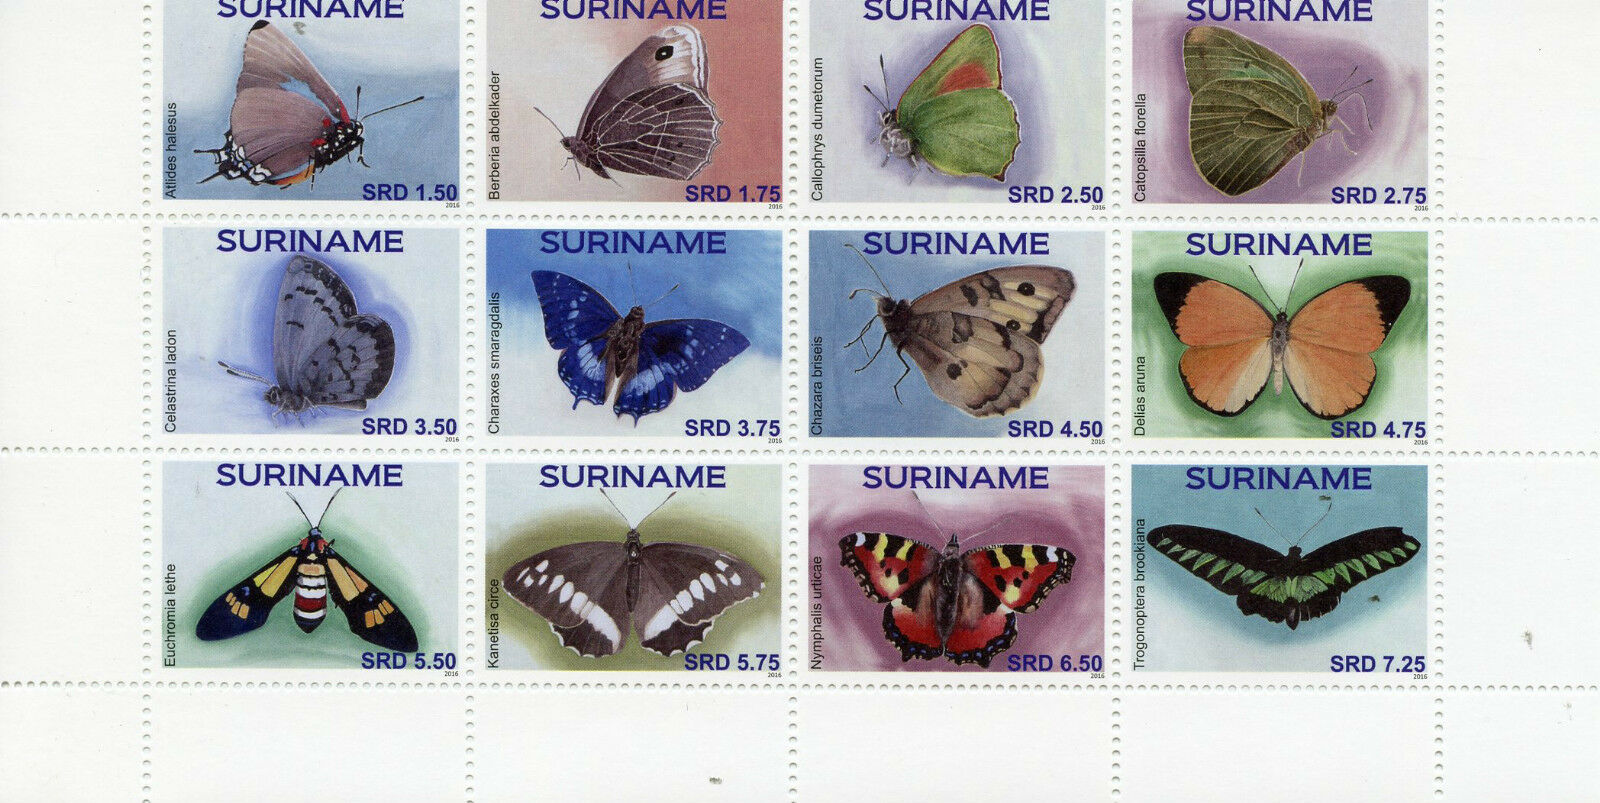 Suriname Butterflies Stamps 2016 MNH Butterfly Insects 12v Block